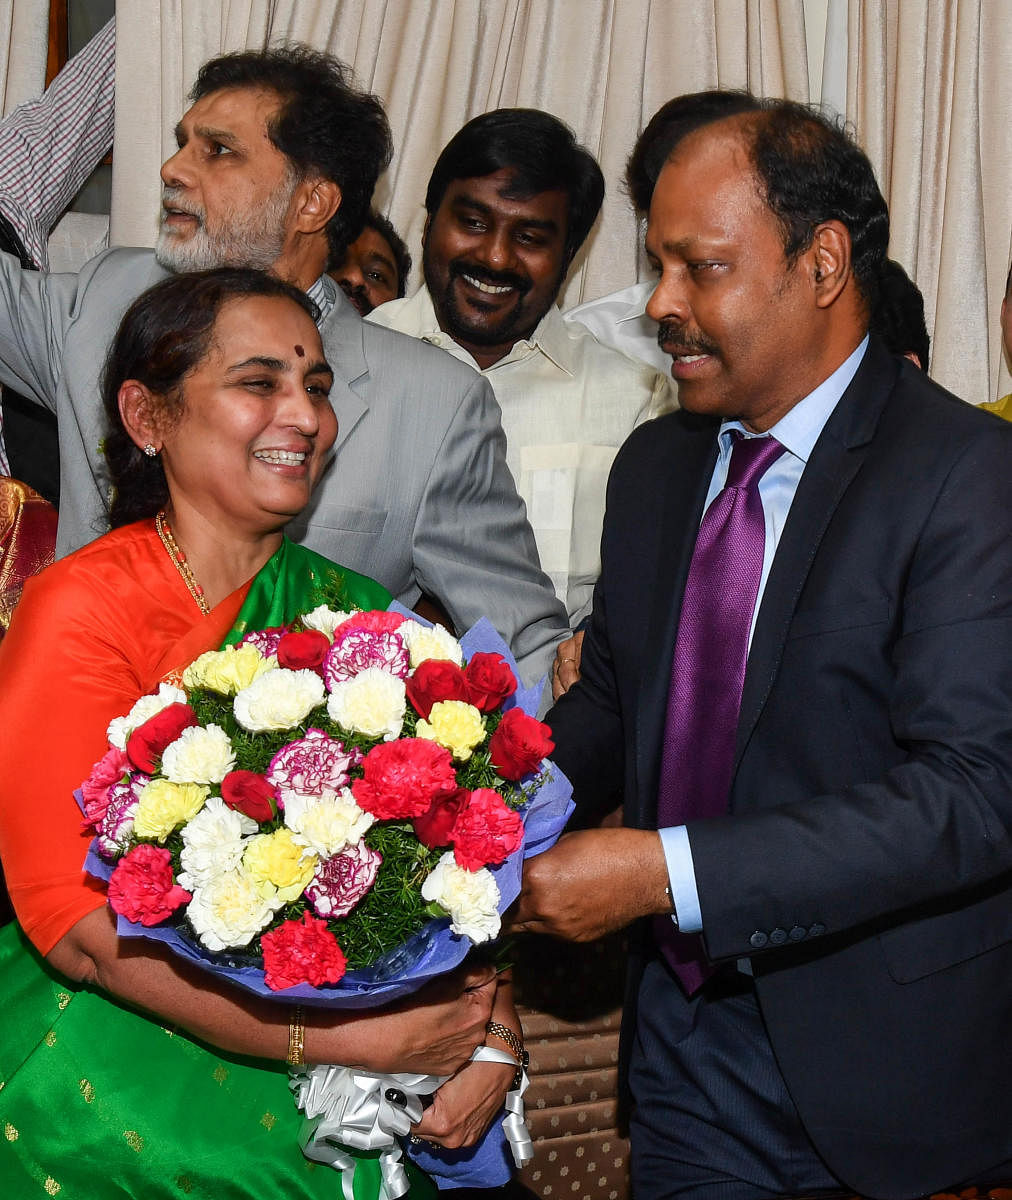 K Ratna Prabha takes charge as the chief secretary from outgoing chief secretary at the Vidhana Soudha in Bengaluru on Thursday. Her IAS officer husband Vidyasagar, who retired recently, is also seen. dh photo